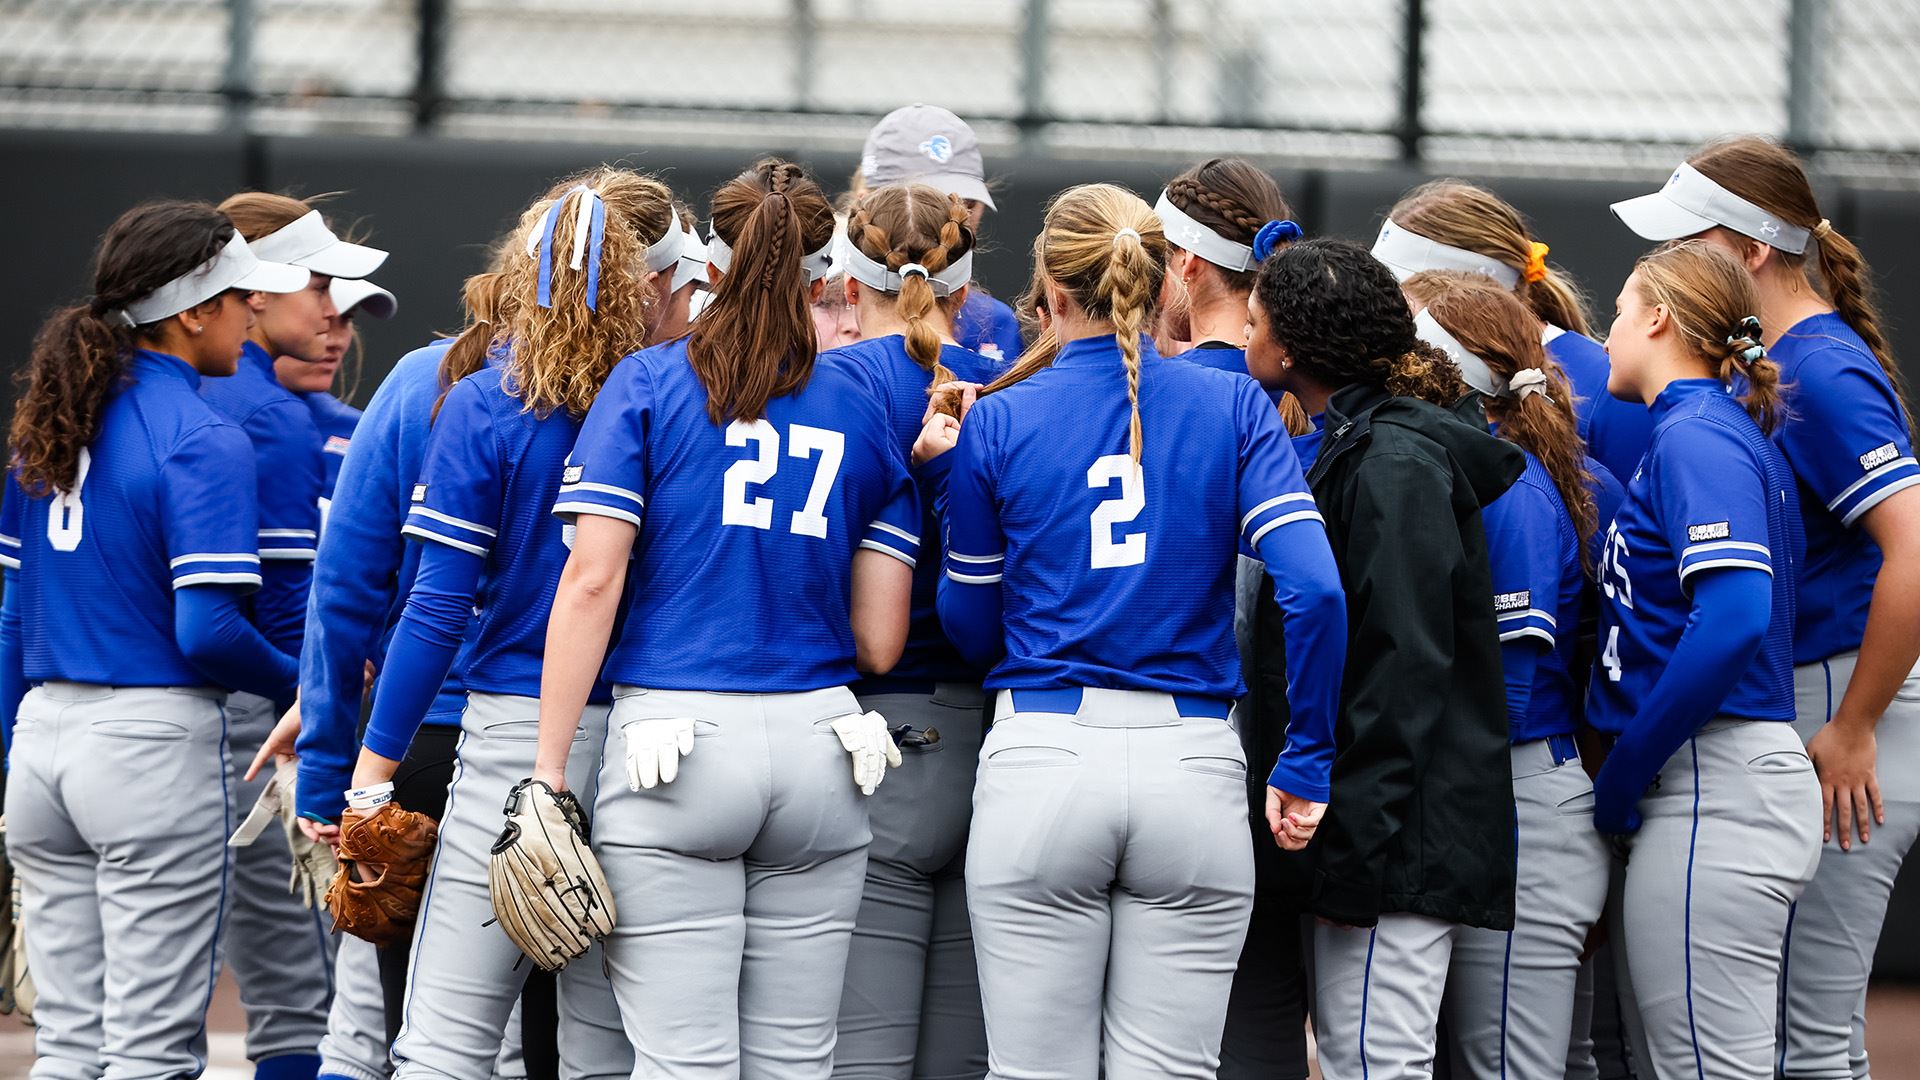 The Seton Hall softball team stands in a huddle during a game.